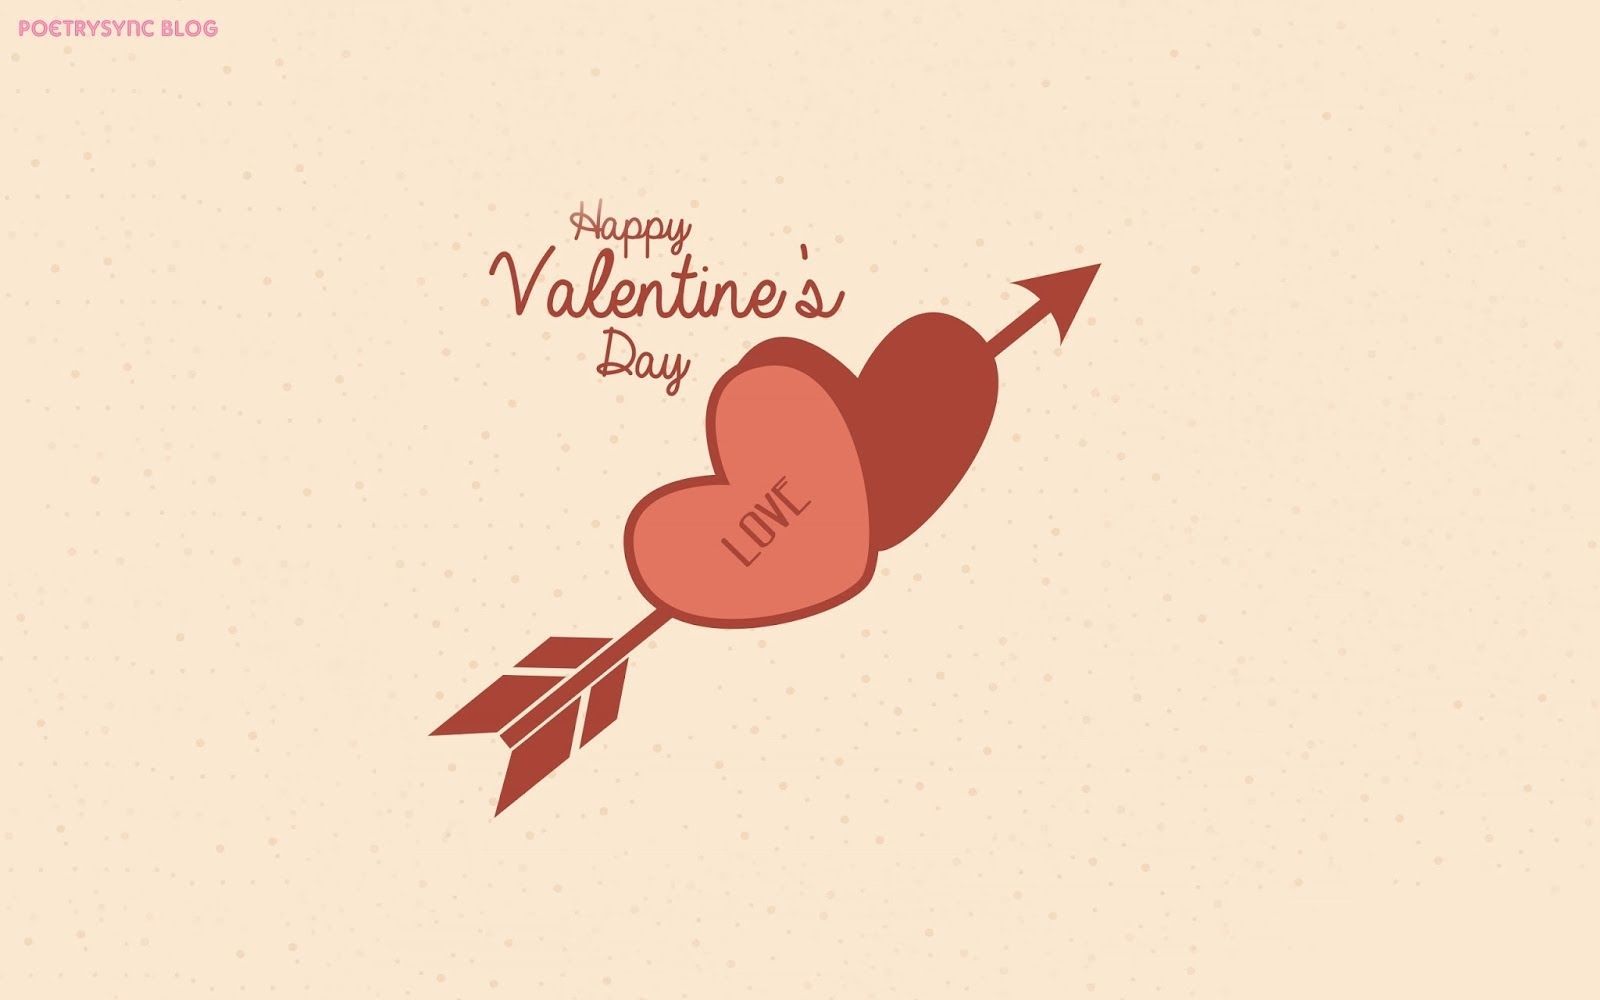 Happy Valentine's Day Cupid Arrow Wallpaper Picture, Photo, and Image for Facebook, Tumblr, , and Twitter